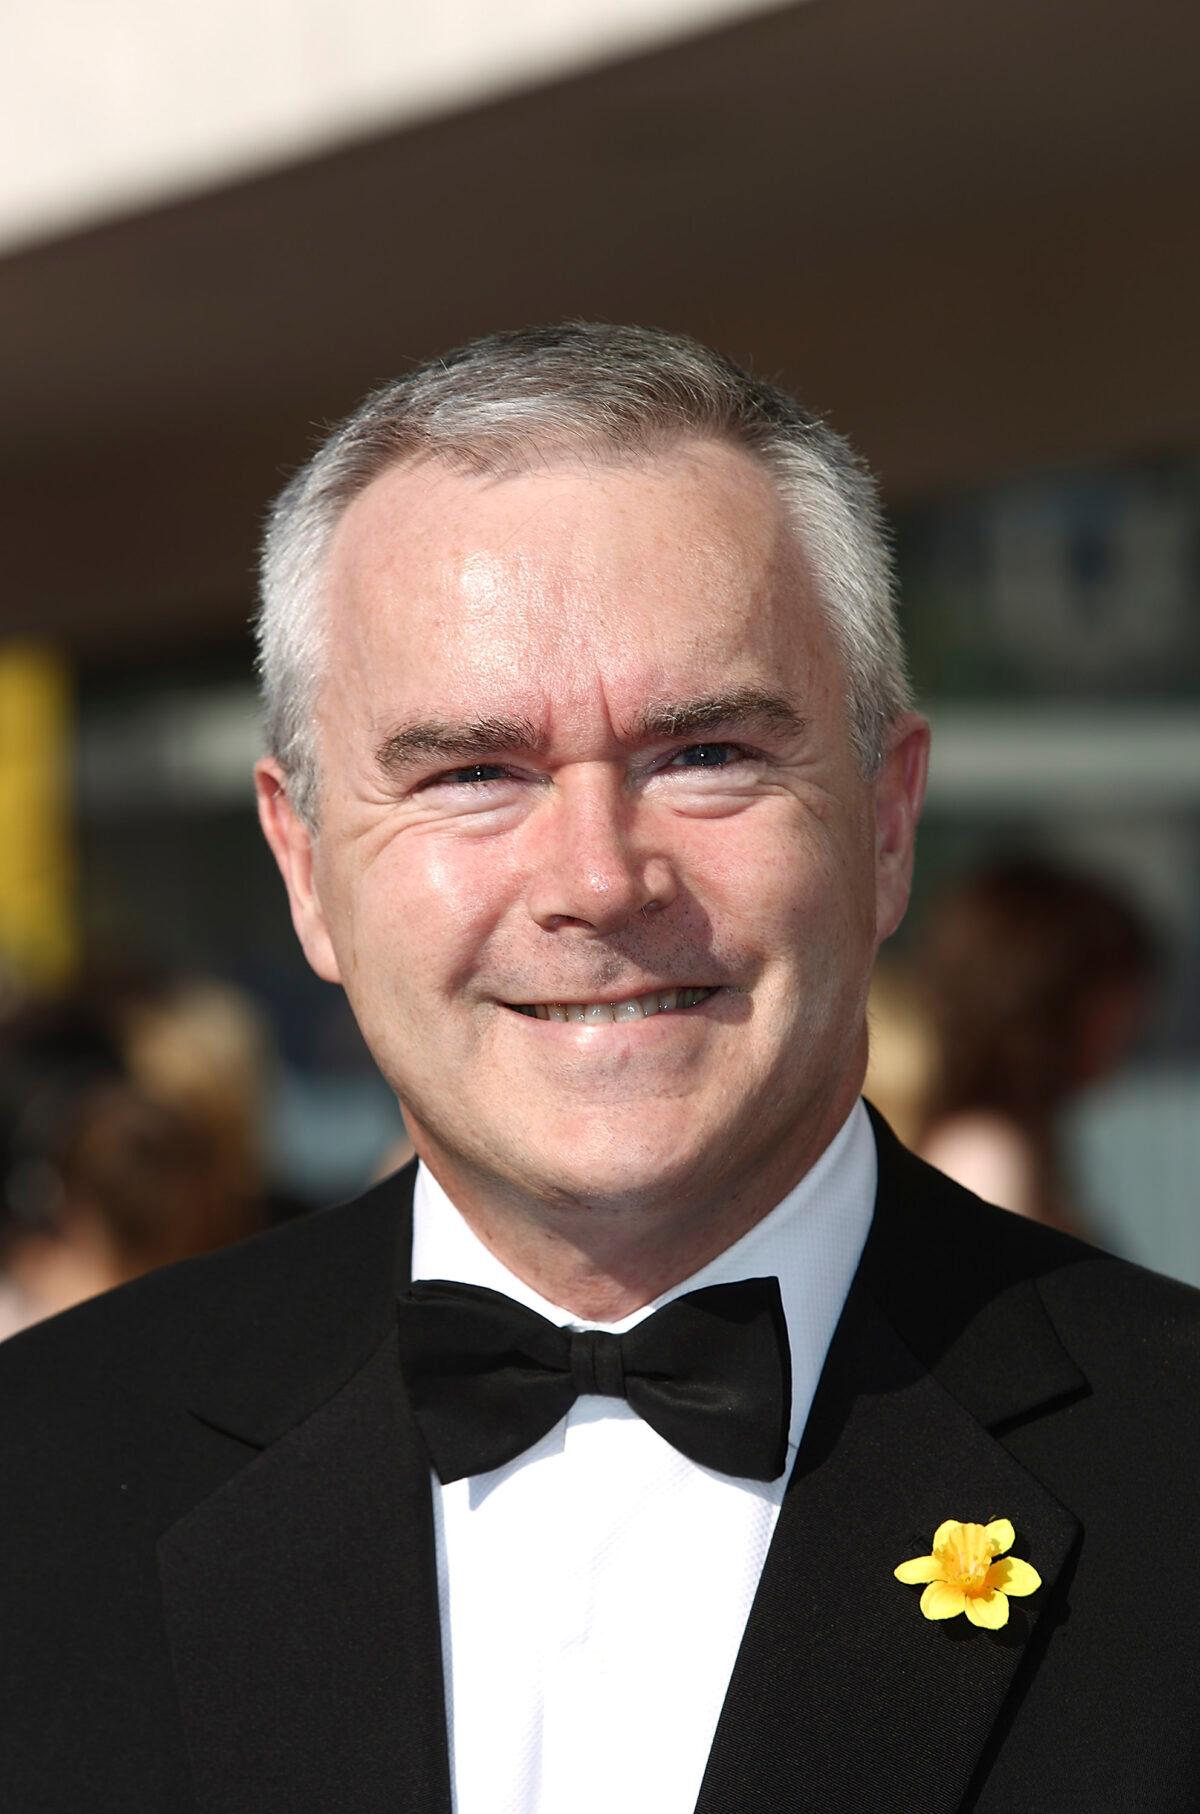 Huw Edwards attends The 2012 Arqiva British Academy Television Awards at the Royal Festival Hall in London, on May 27, 2012. (Tim Whitby/Getty Images)